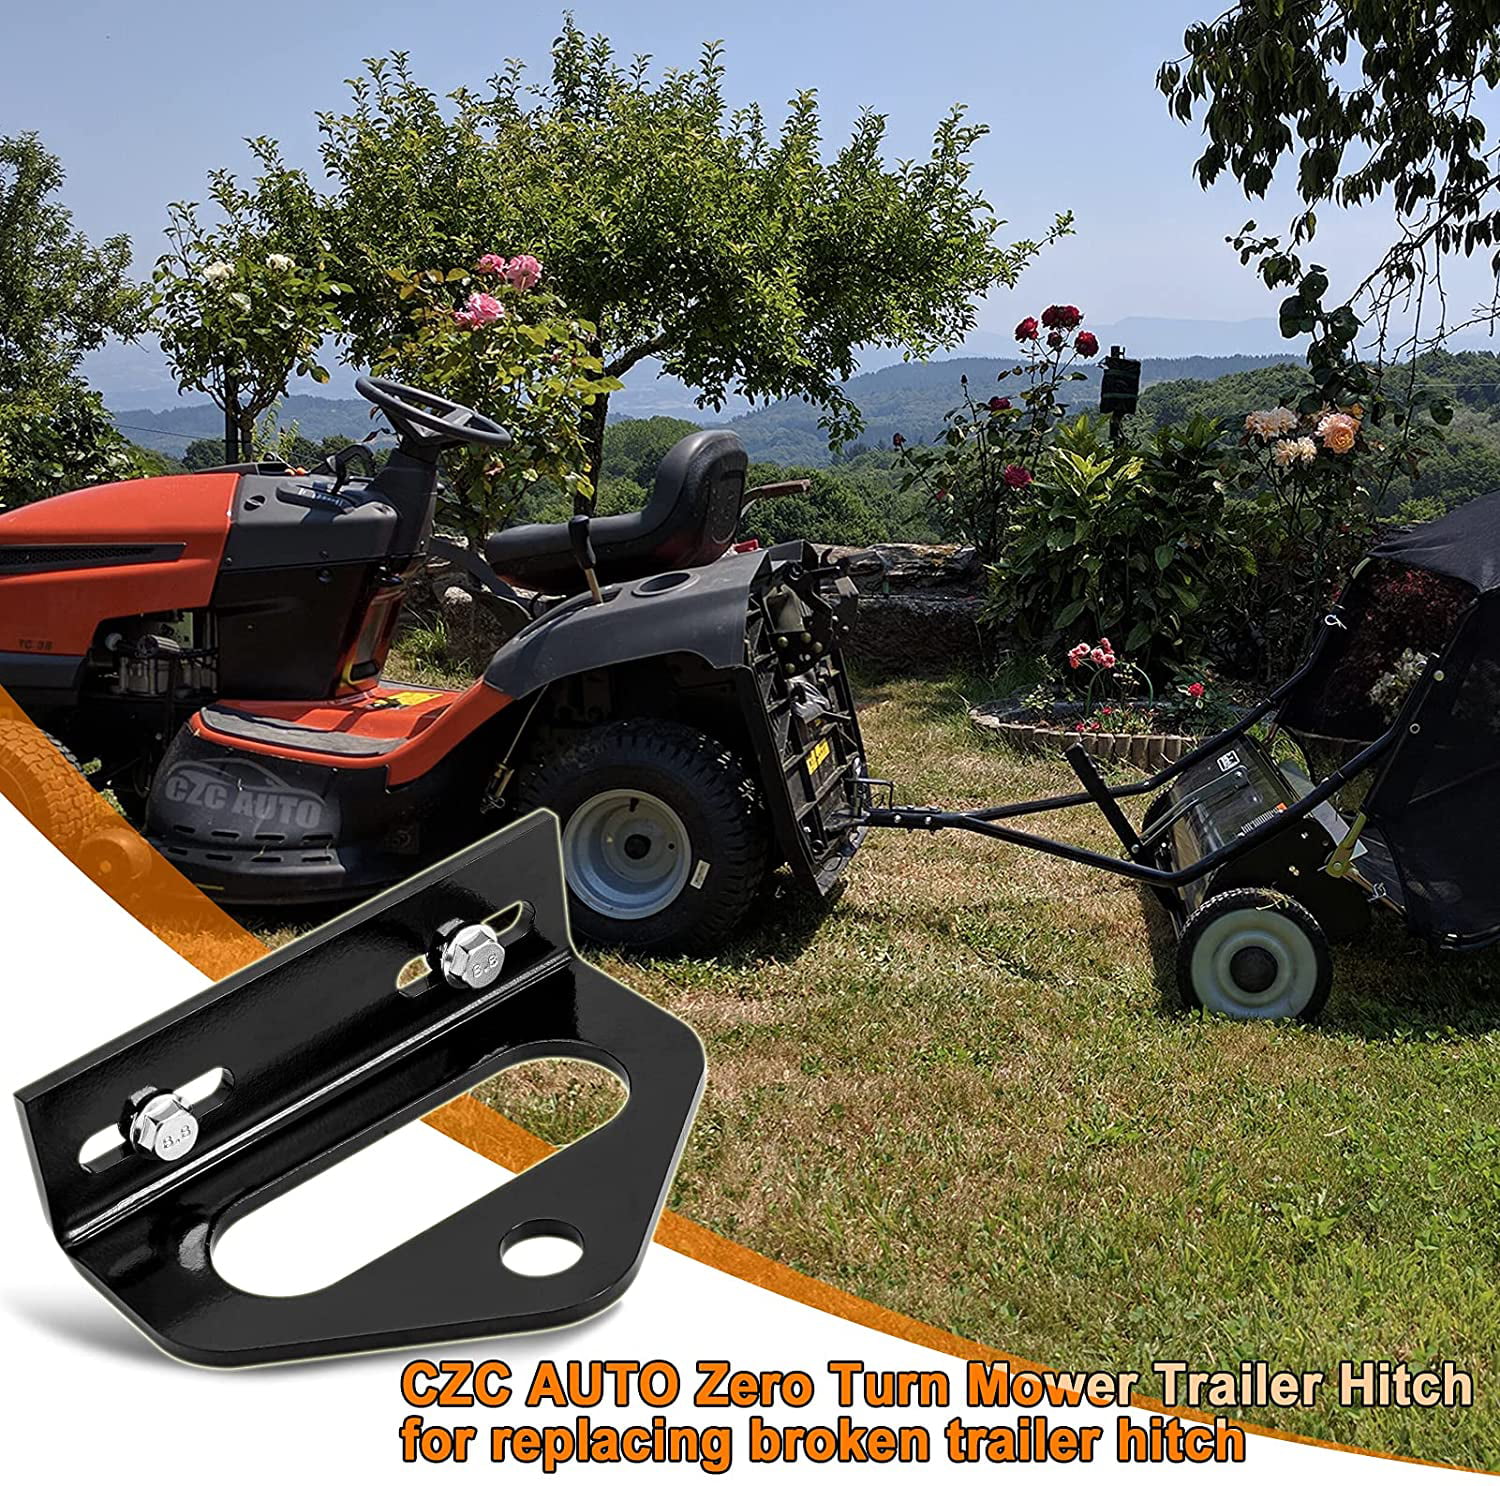 Heavy Duty Steel and Versatile Chain Slot QWORK Zero Turn Mower Trailer Hitch 2.4-5 Hole Center 3/4 Pin Hole Mounting Hardware Included 